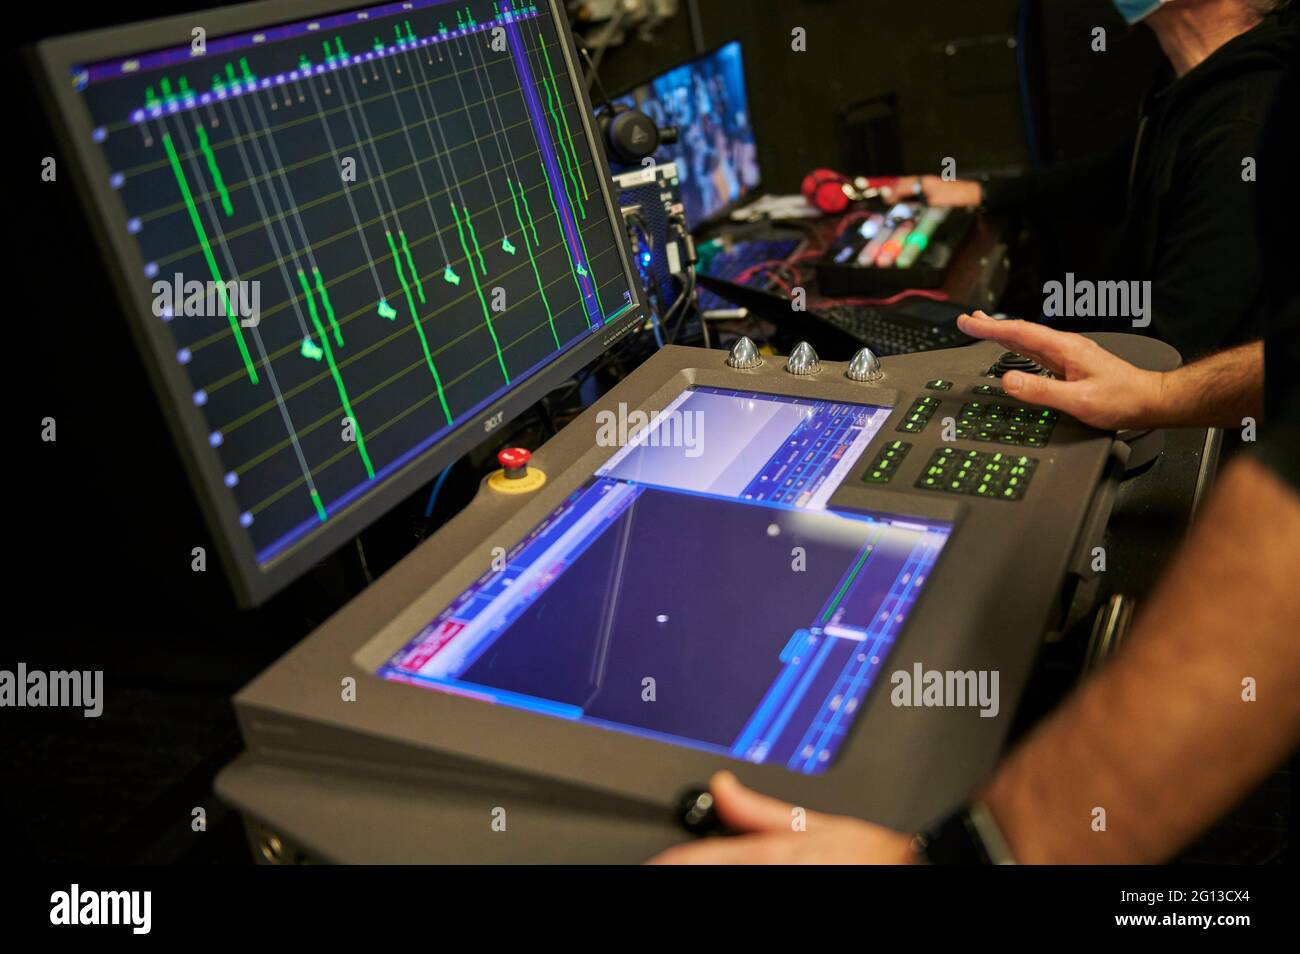 light control table in theater. Stock Photo